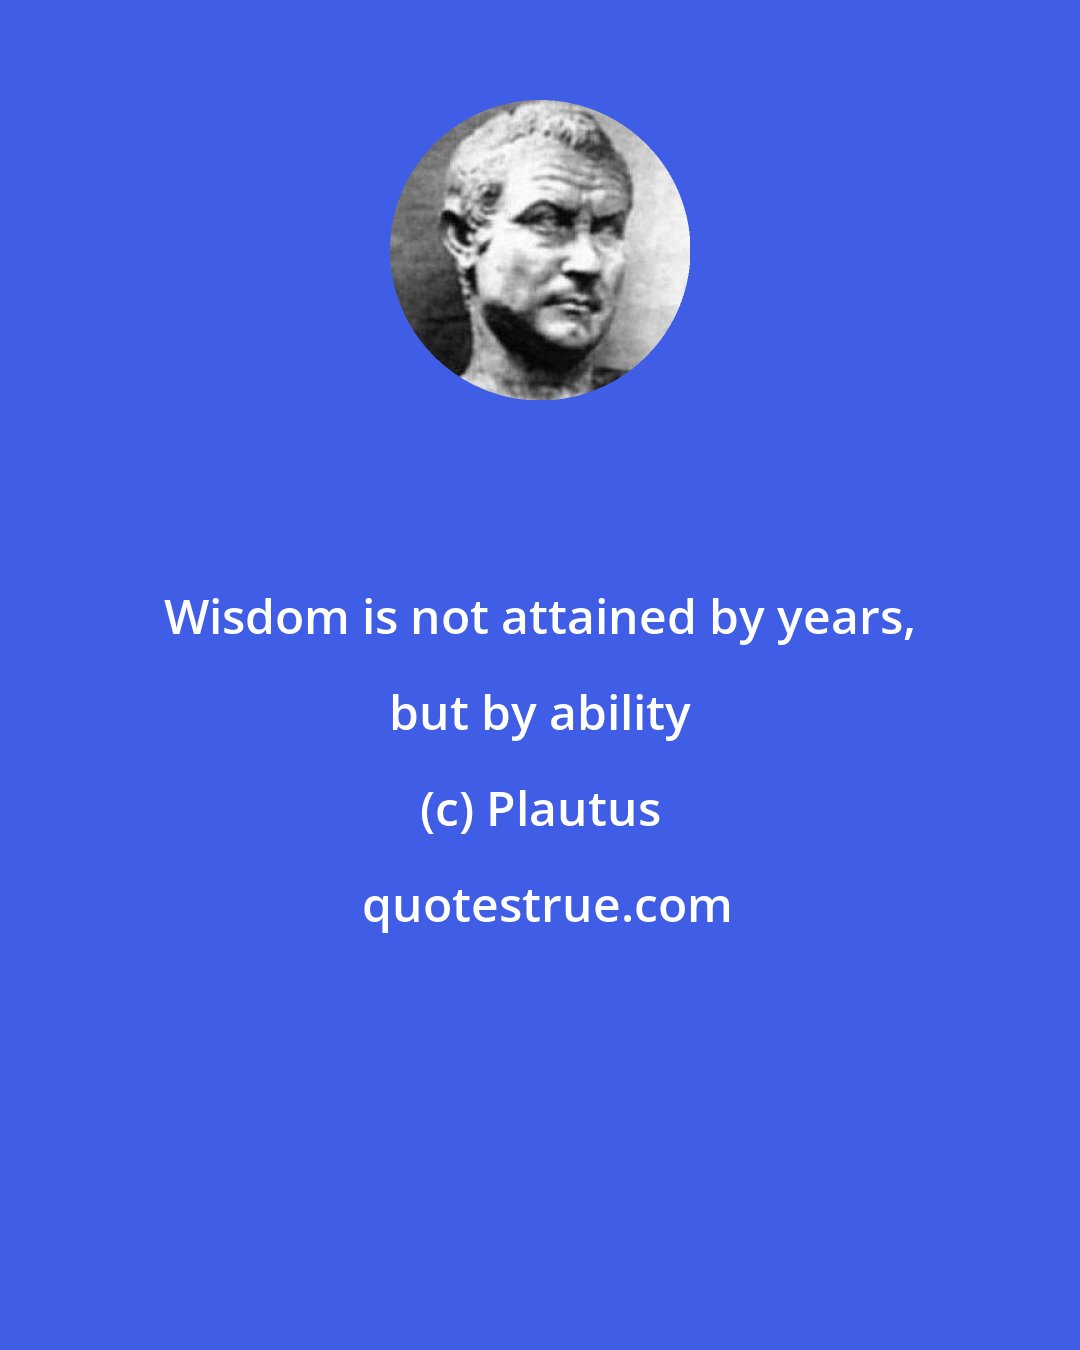 Plautus: Wisdom is not attained by years, but by ability